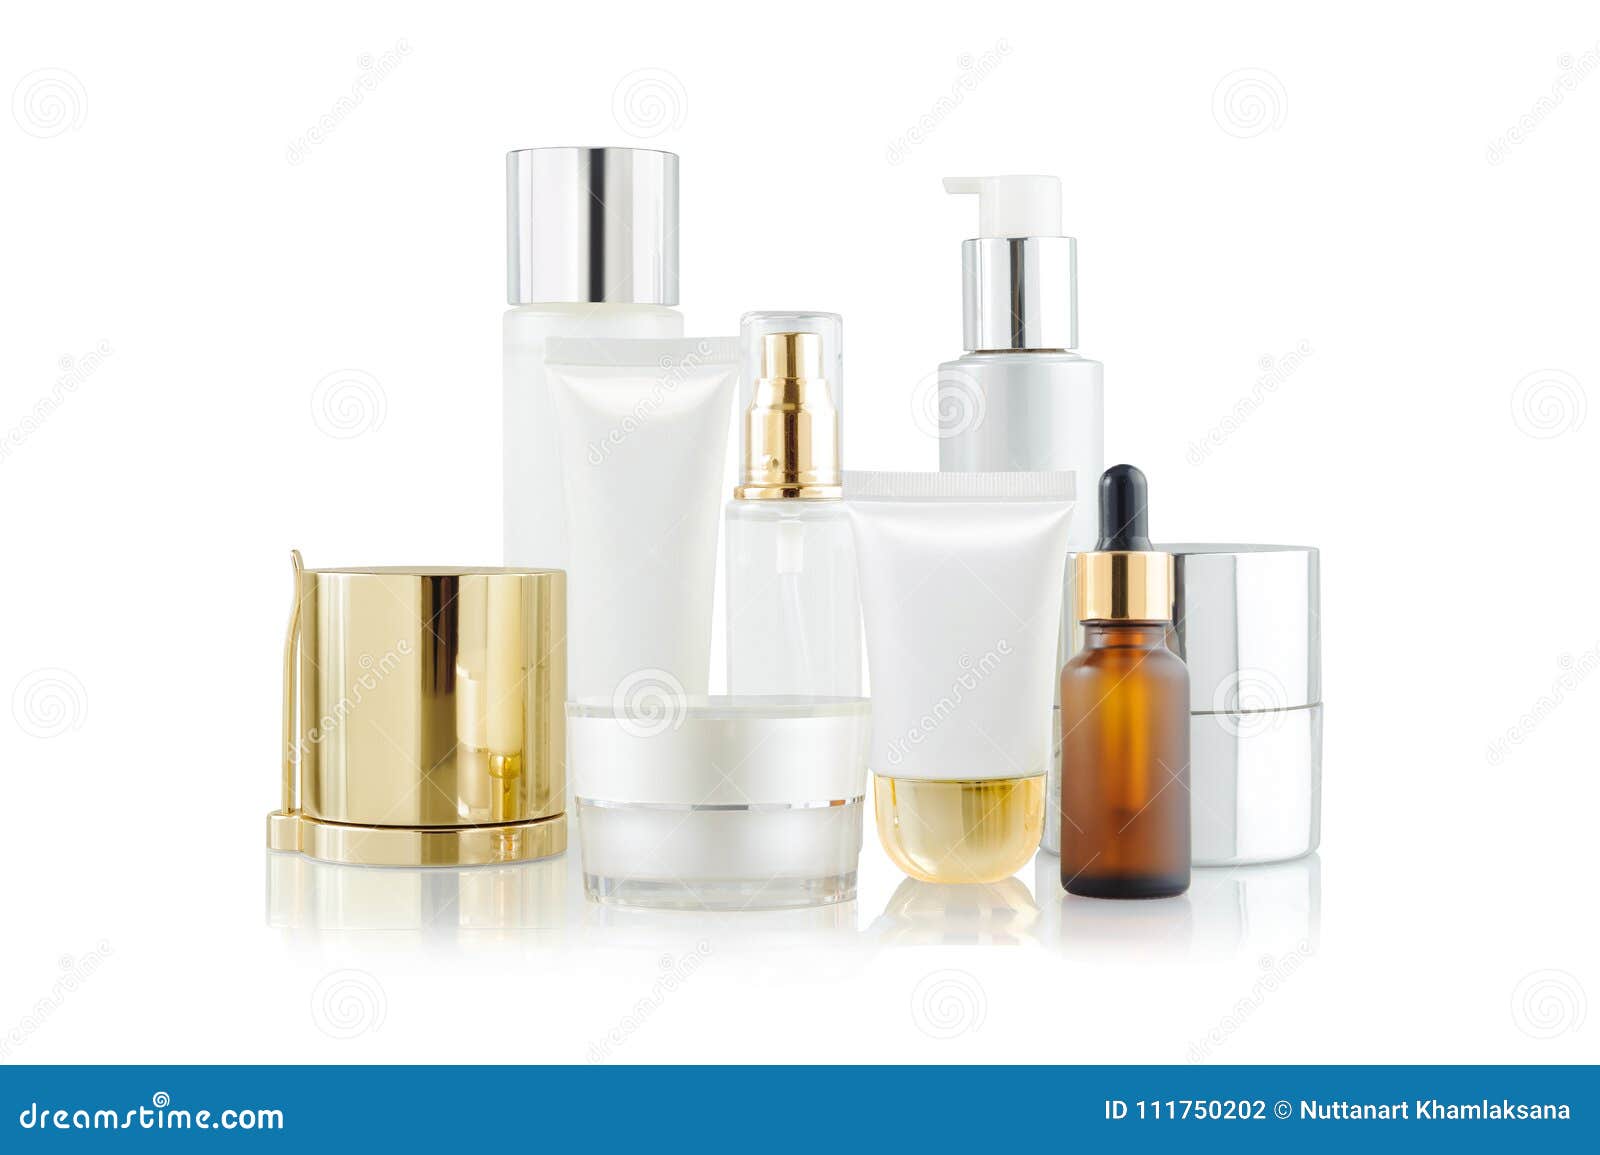 set of cosmetic containers. cosmetic product bottles, dispensers, droppers, jars and tubes on white